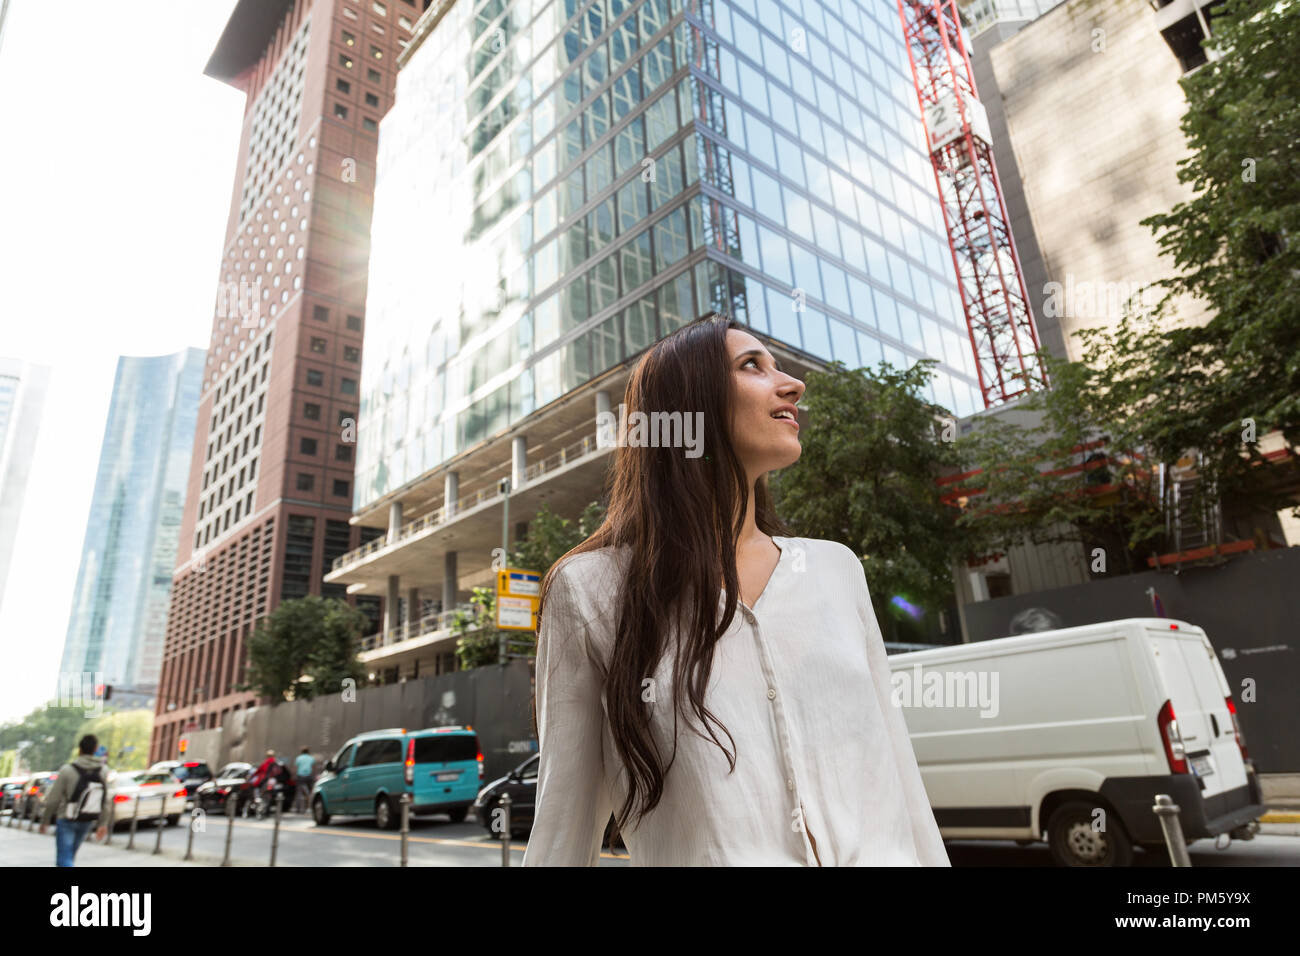 Young woman standing in awe underneath skyscrapers and office buildings in an urban metropolis. Low angle view. Stock Photo